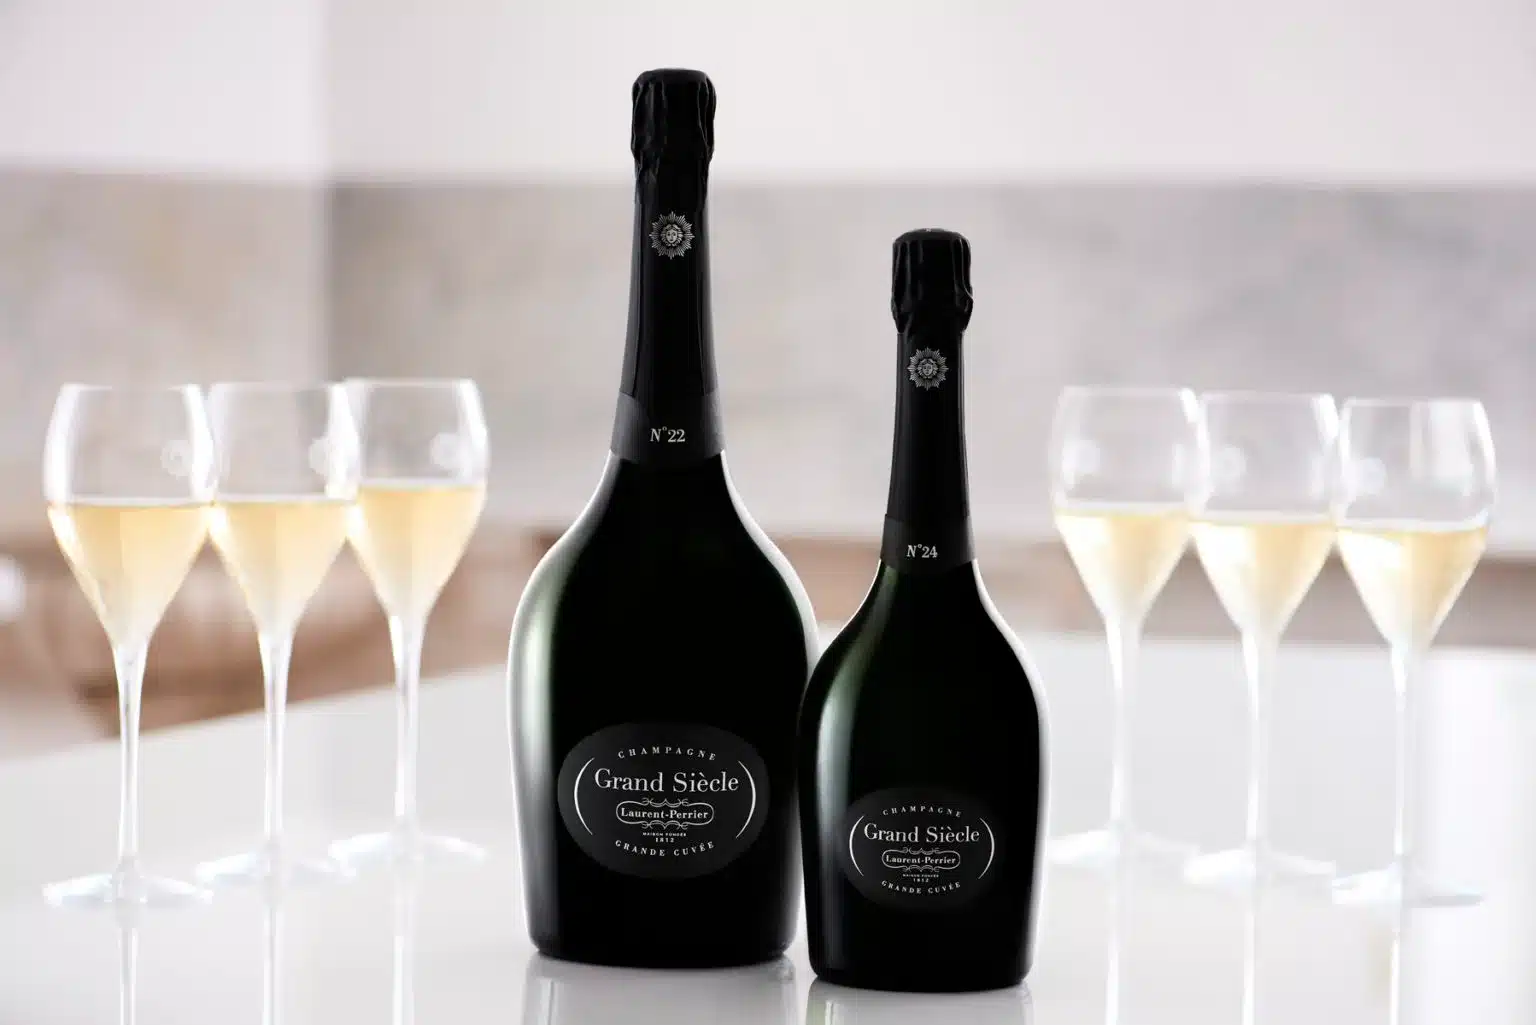 Laurent-Perrier Grand Siècle Champagne